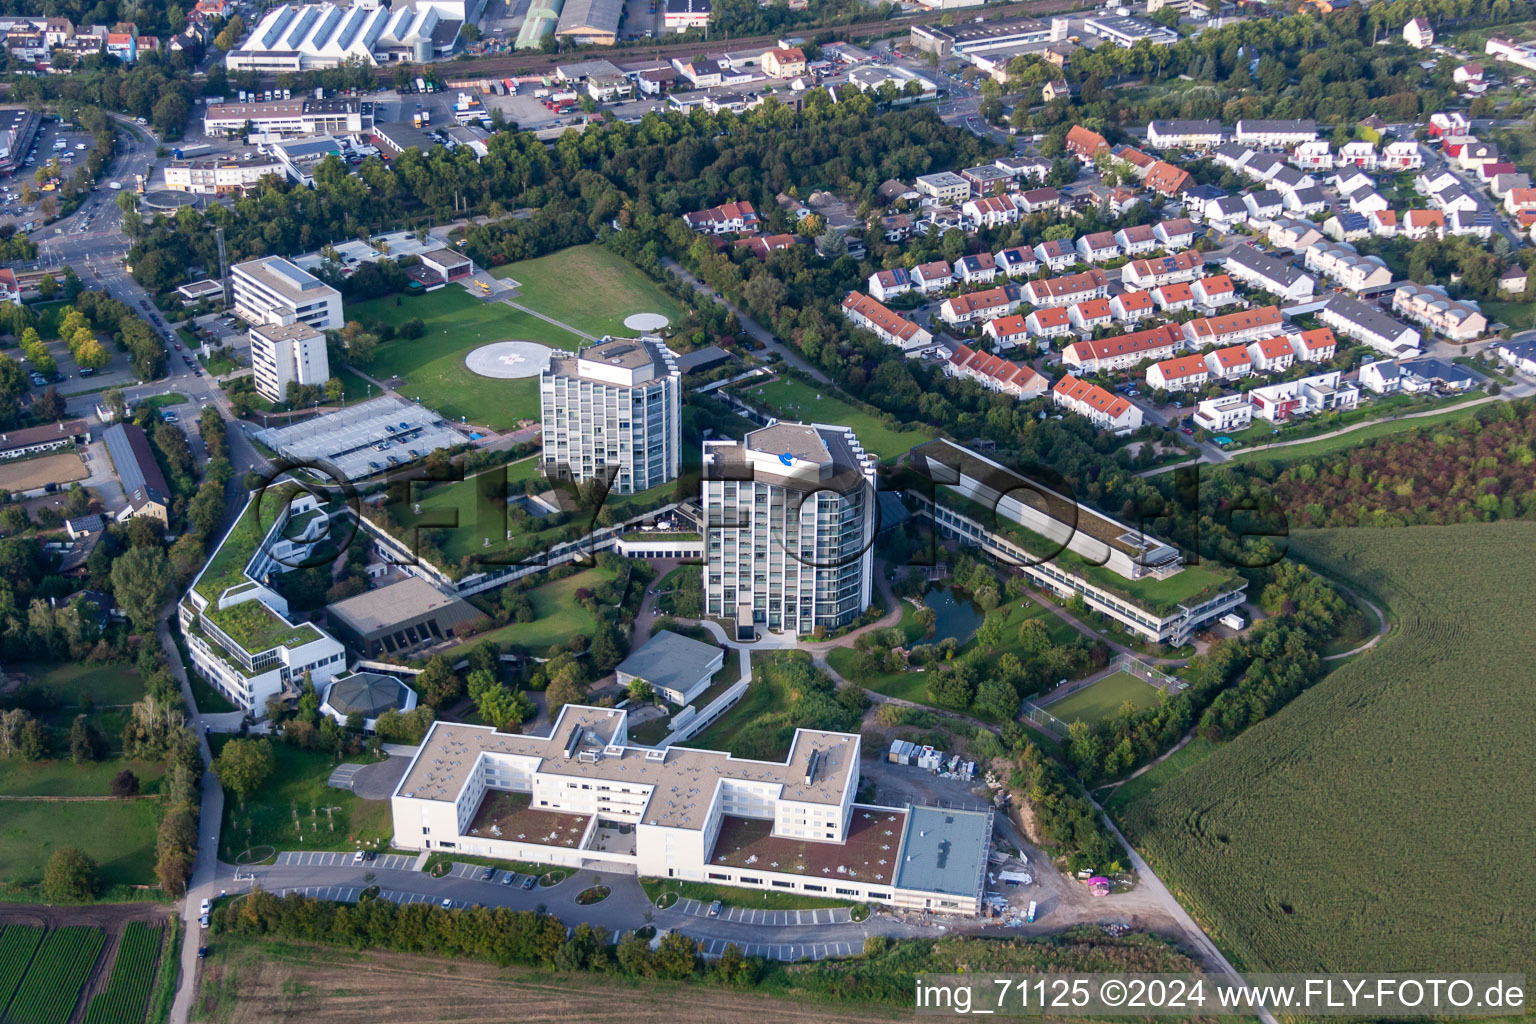 BG accident clinic in the district Oggersheim in Ludwigshafen am Rhein in the state Rhineland-Palatinate, Germany seen from above